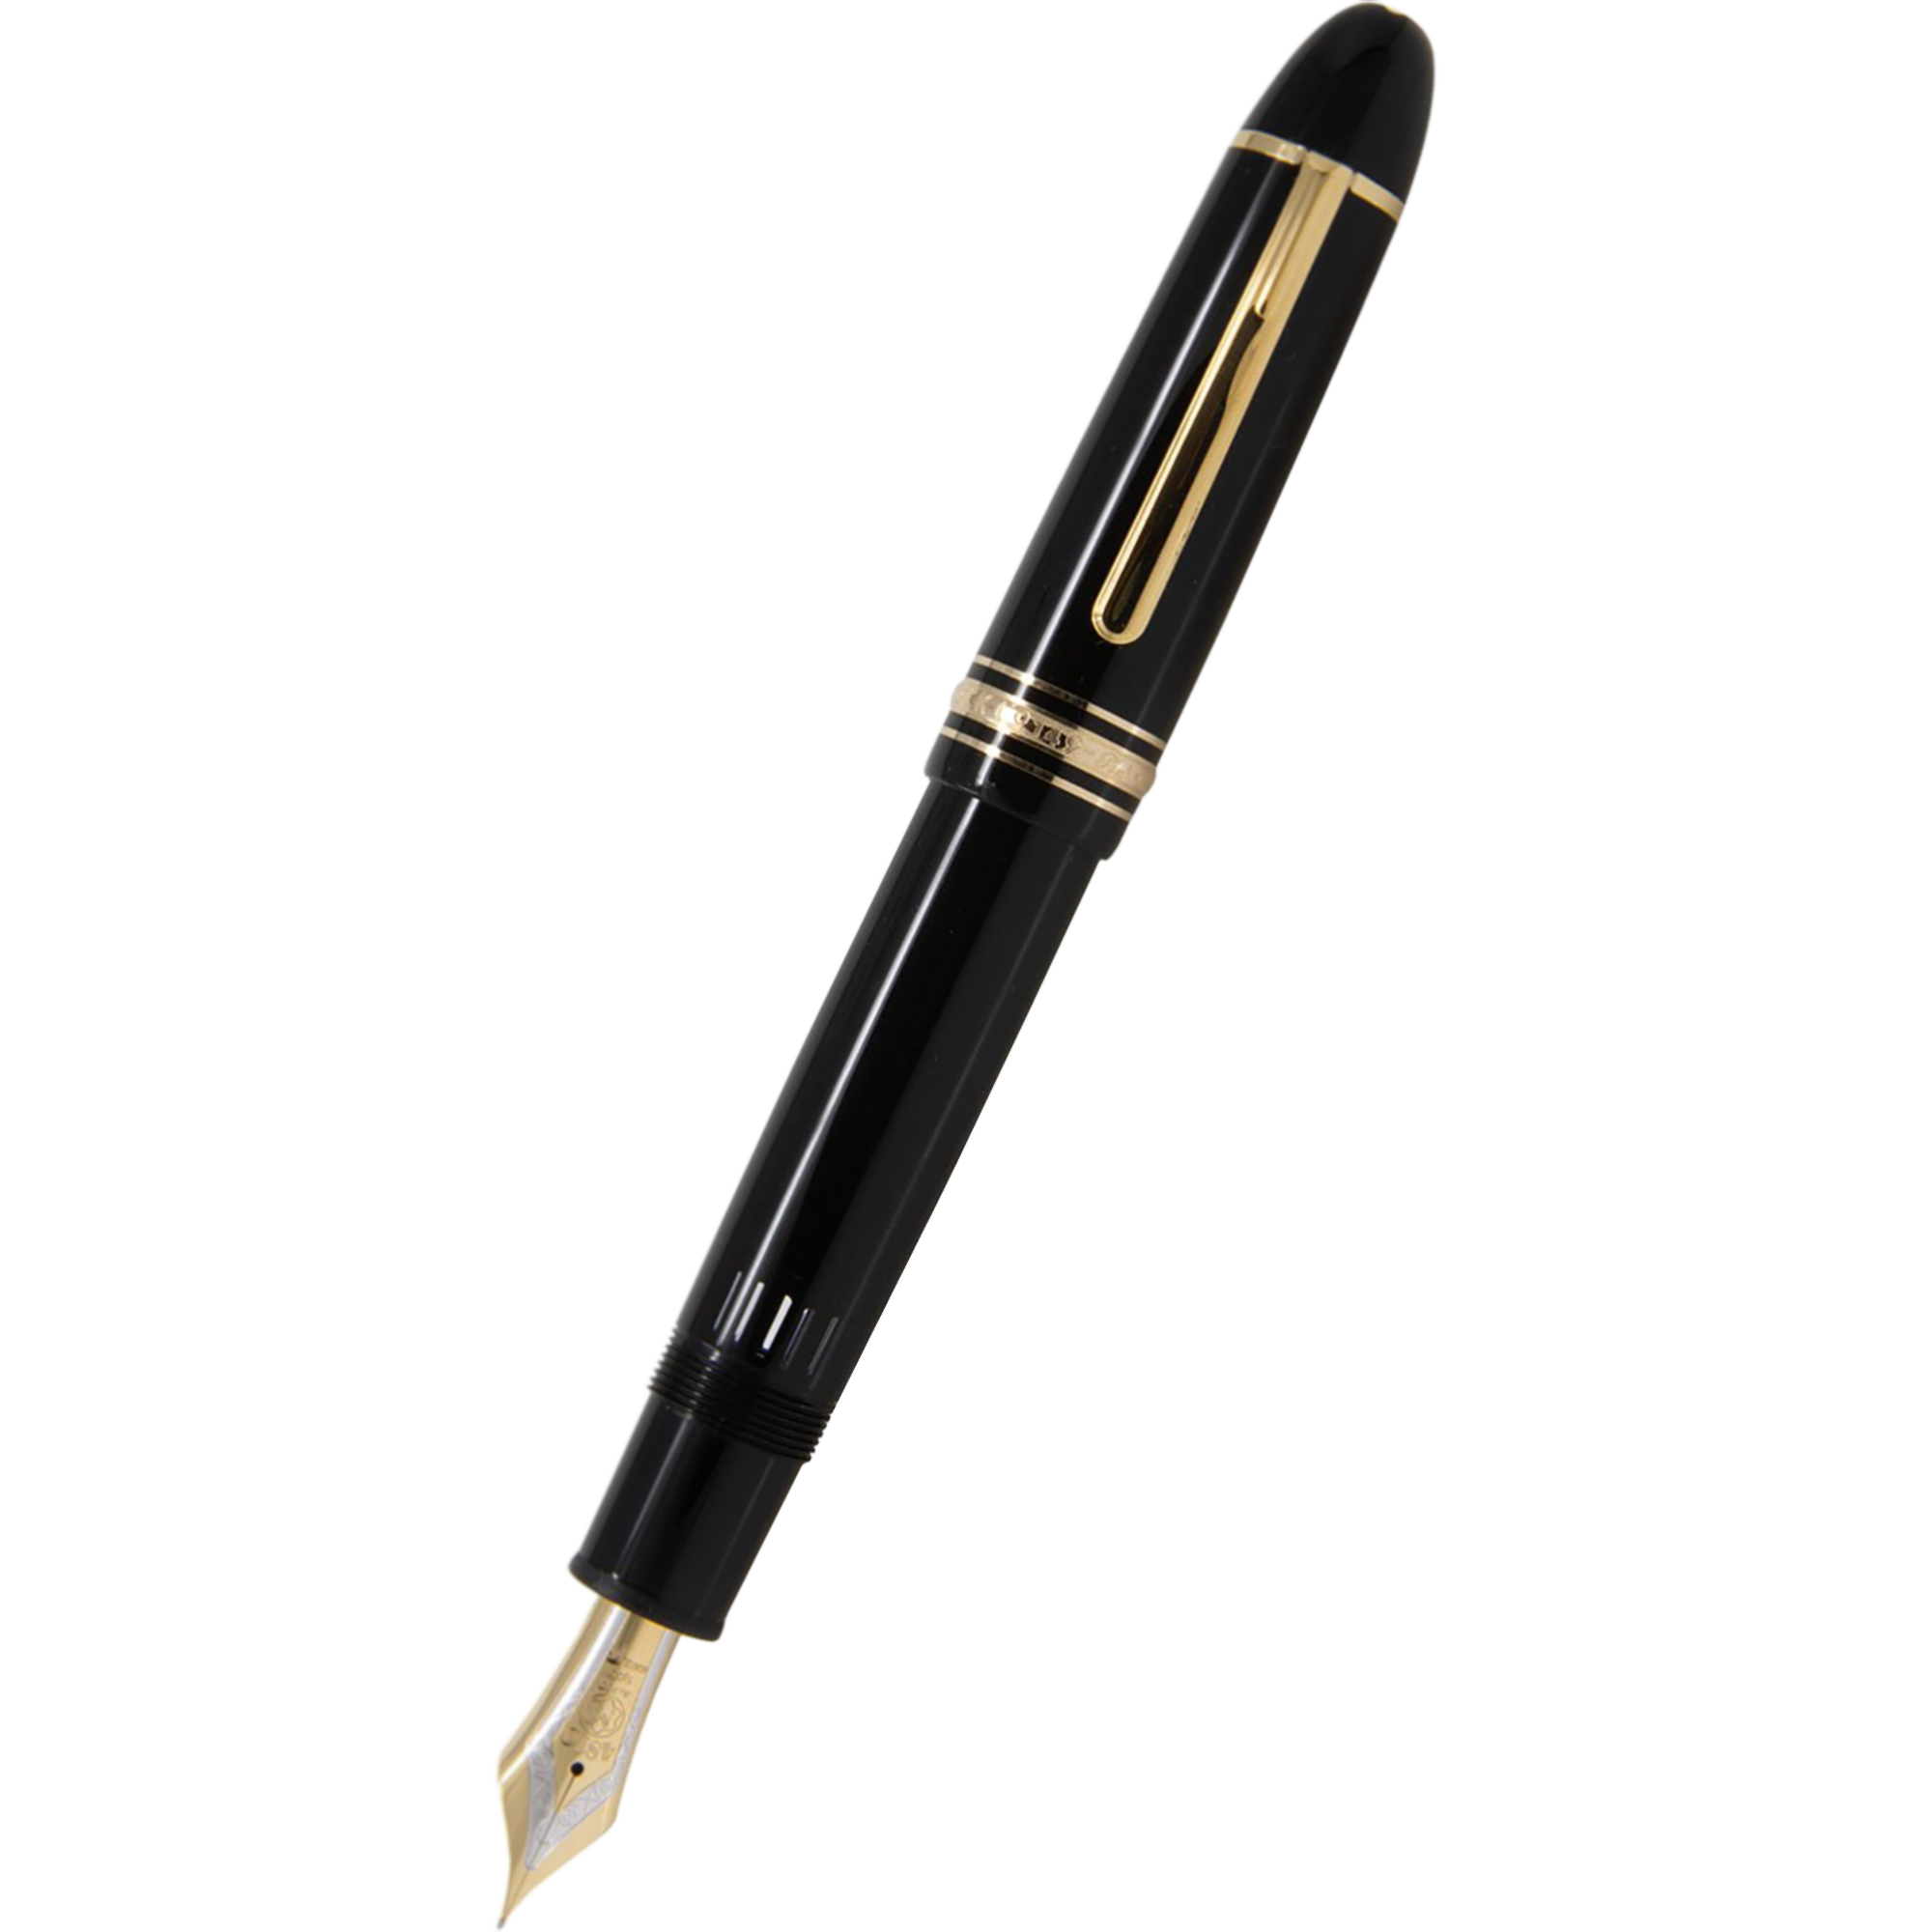 Montblanc Designer Brand Review [How Good are Montblanc?]